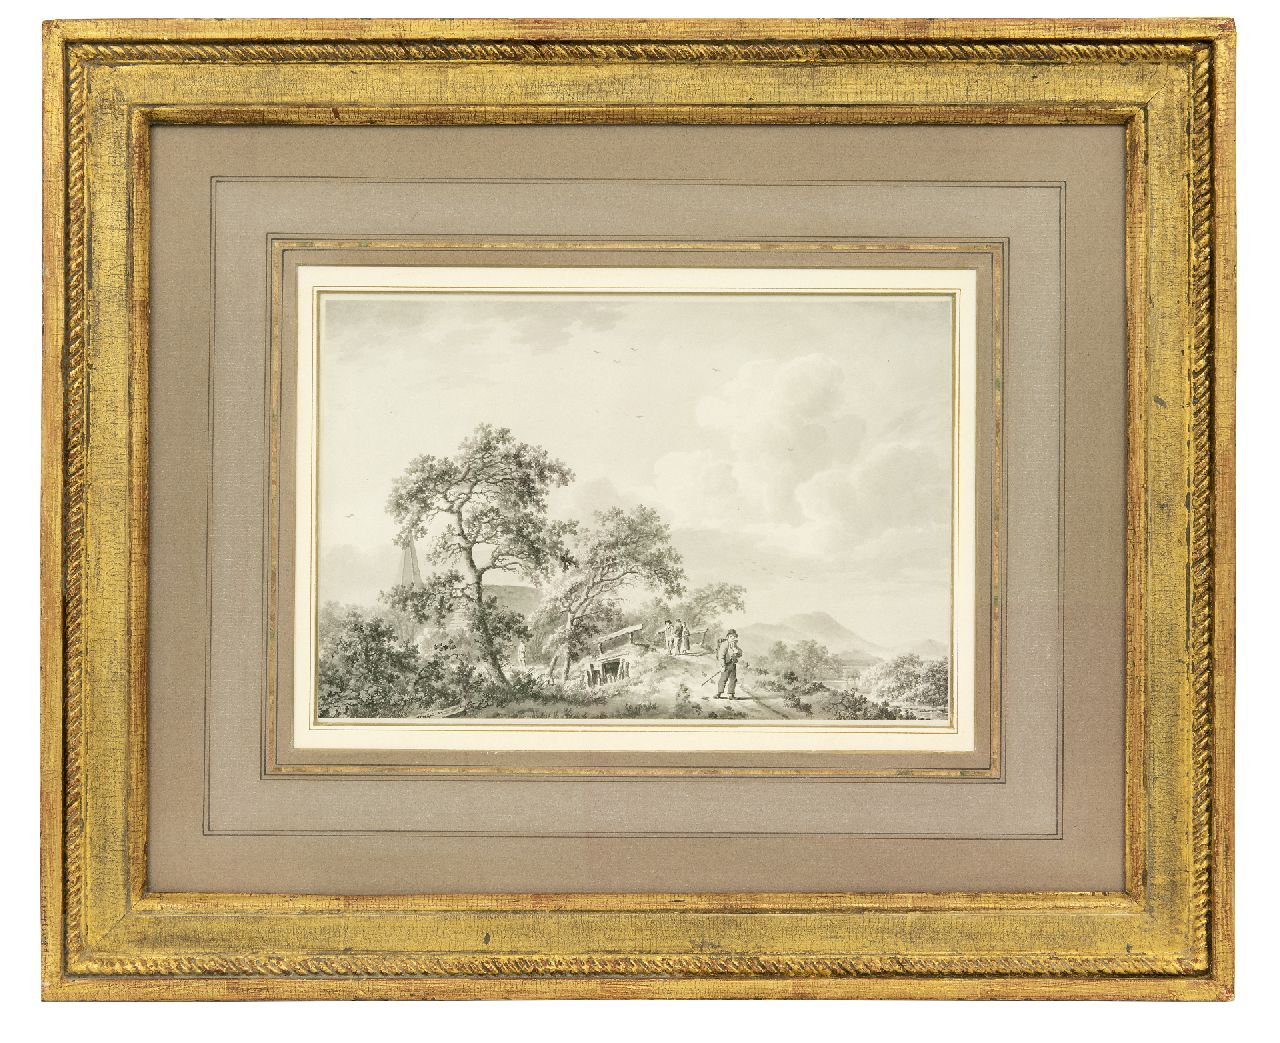 Koekkoek B.C.  | Barend Cornelis Koekkoek | Watercolours and drawings offered for sale | Land folk on a sandy path near a village, pen, brush and ink on paper 17.5 x 26.0 cm, signed l.l.